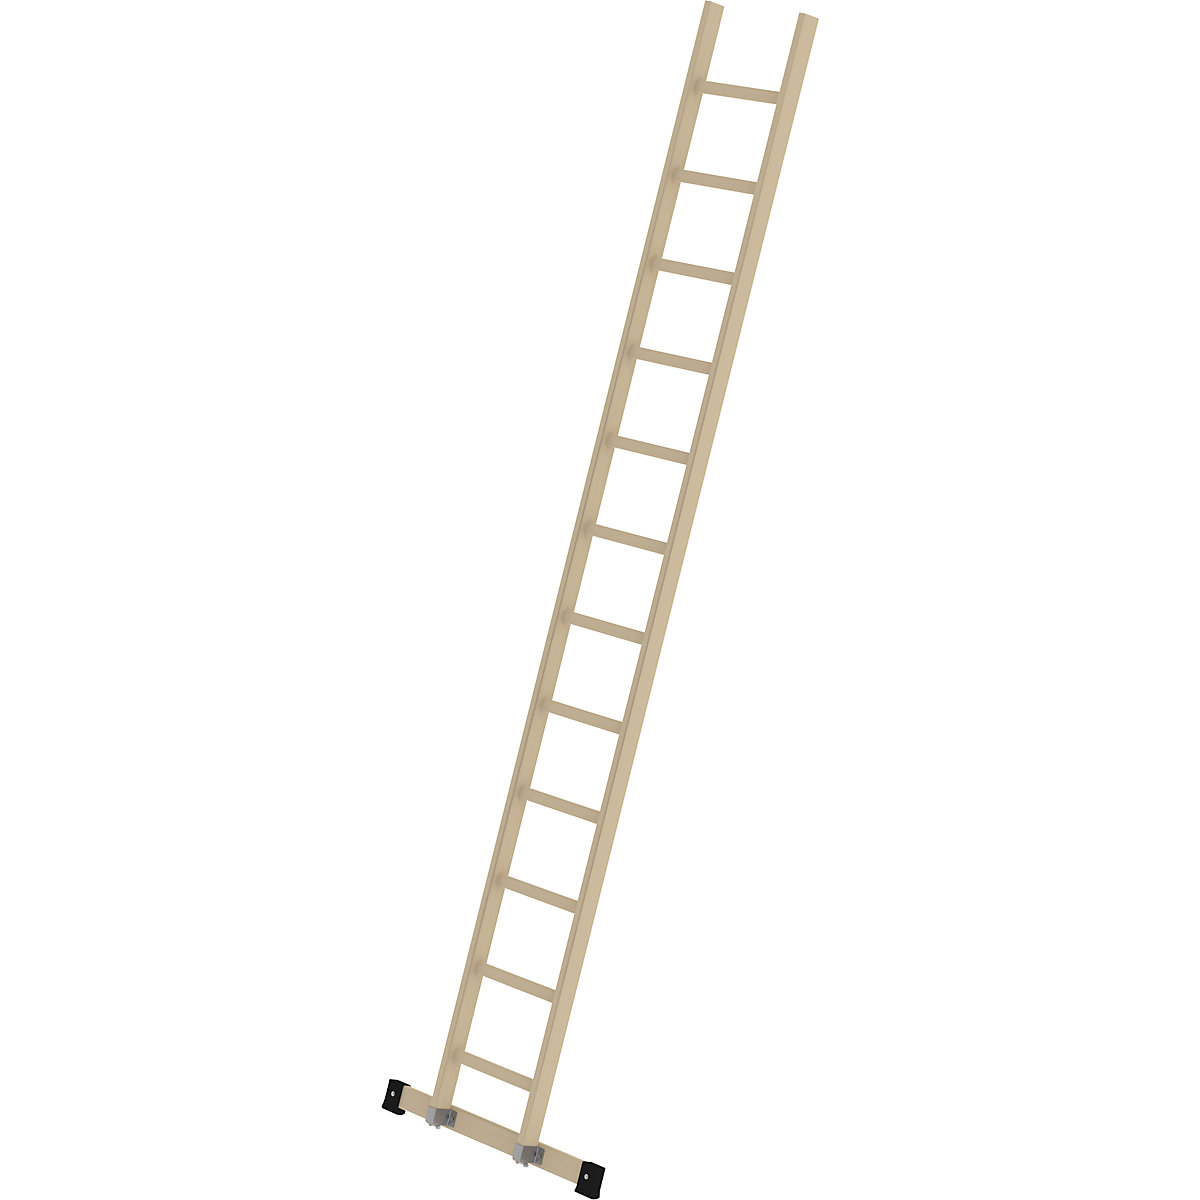 Wooden lean to ladder – MUNK, with rungs, 12 rungs incl. beams-2